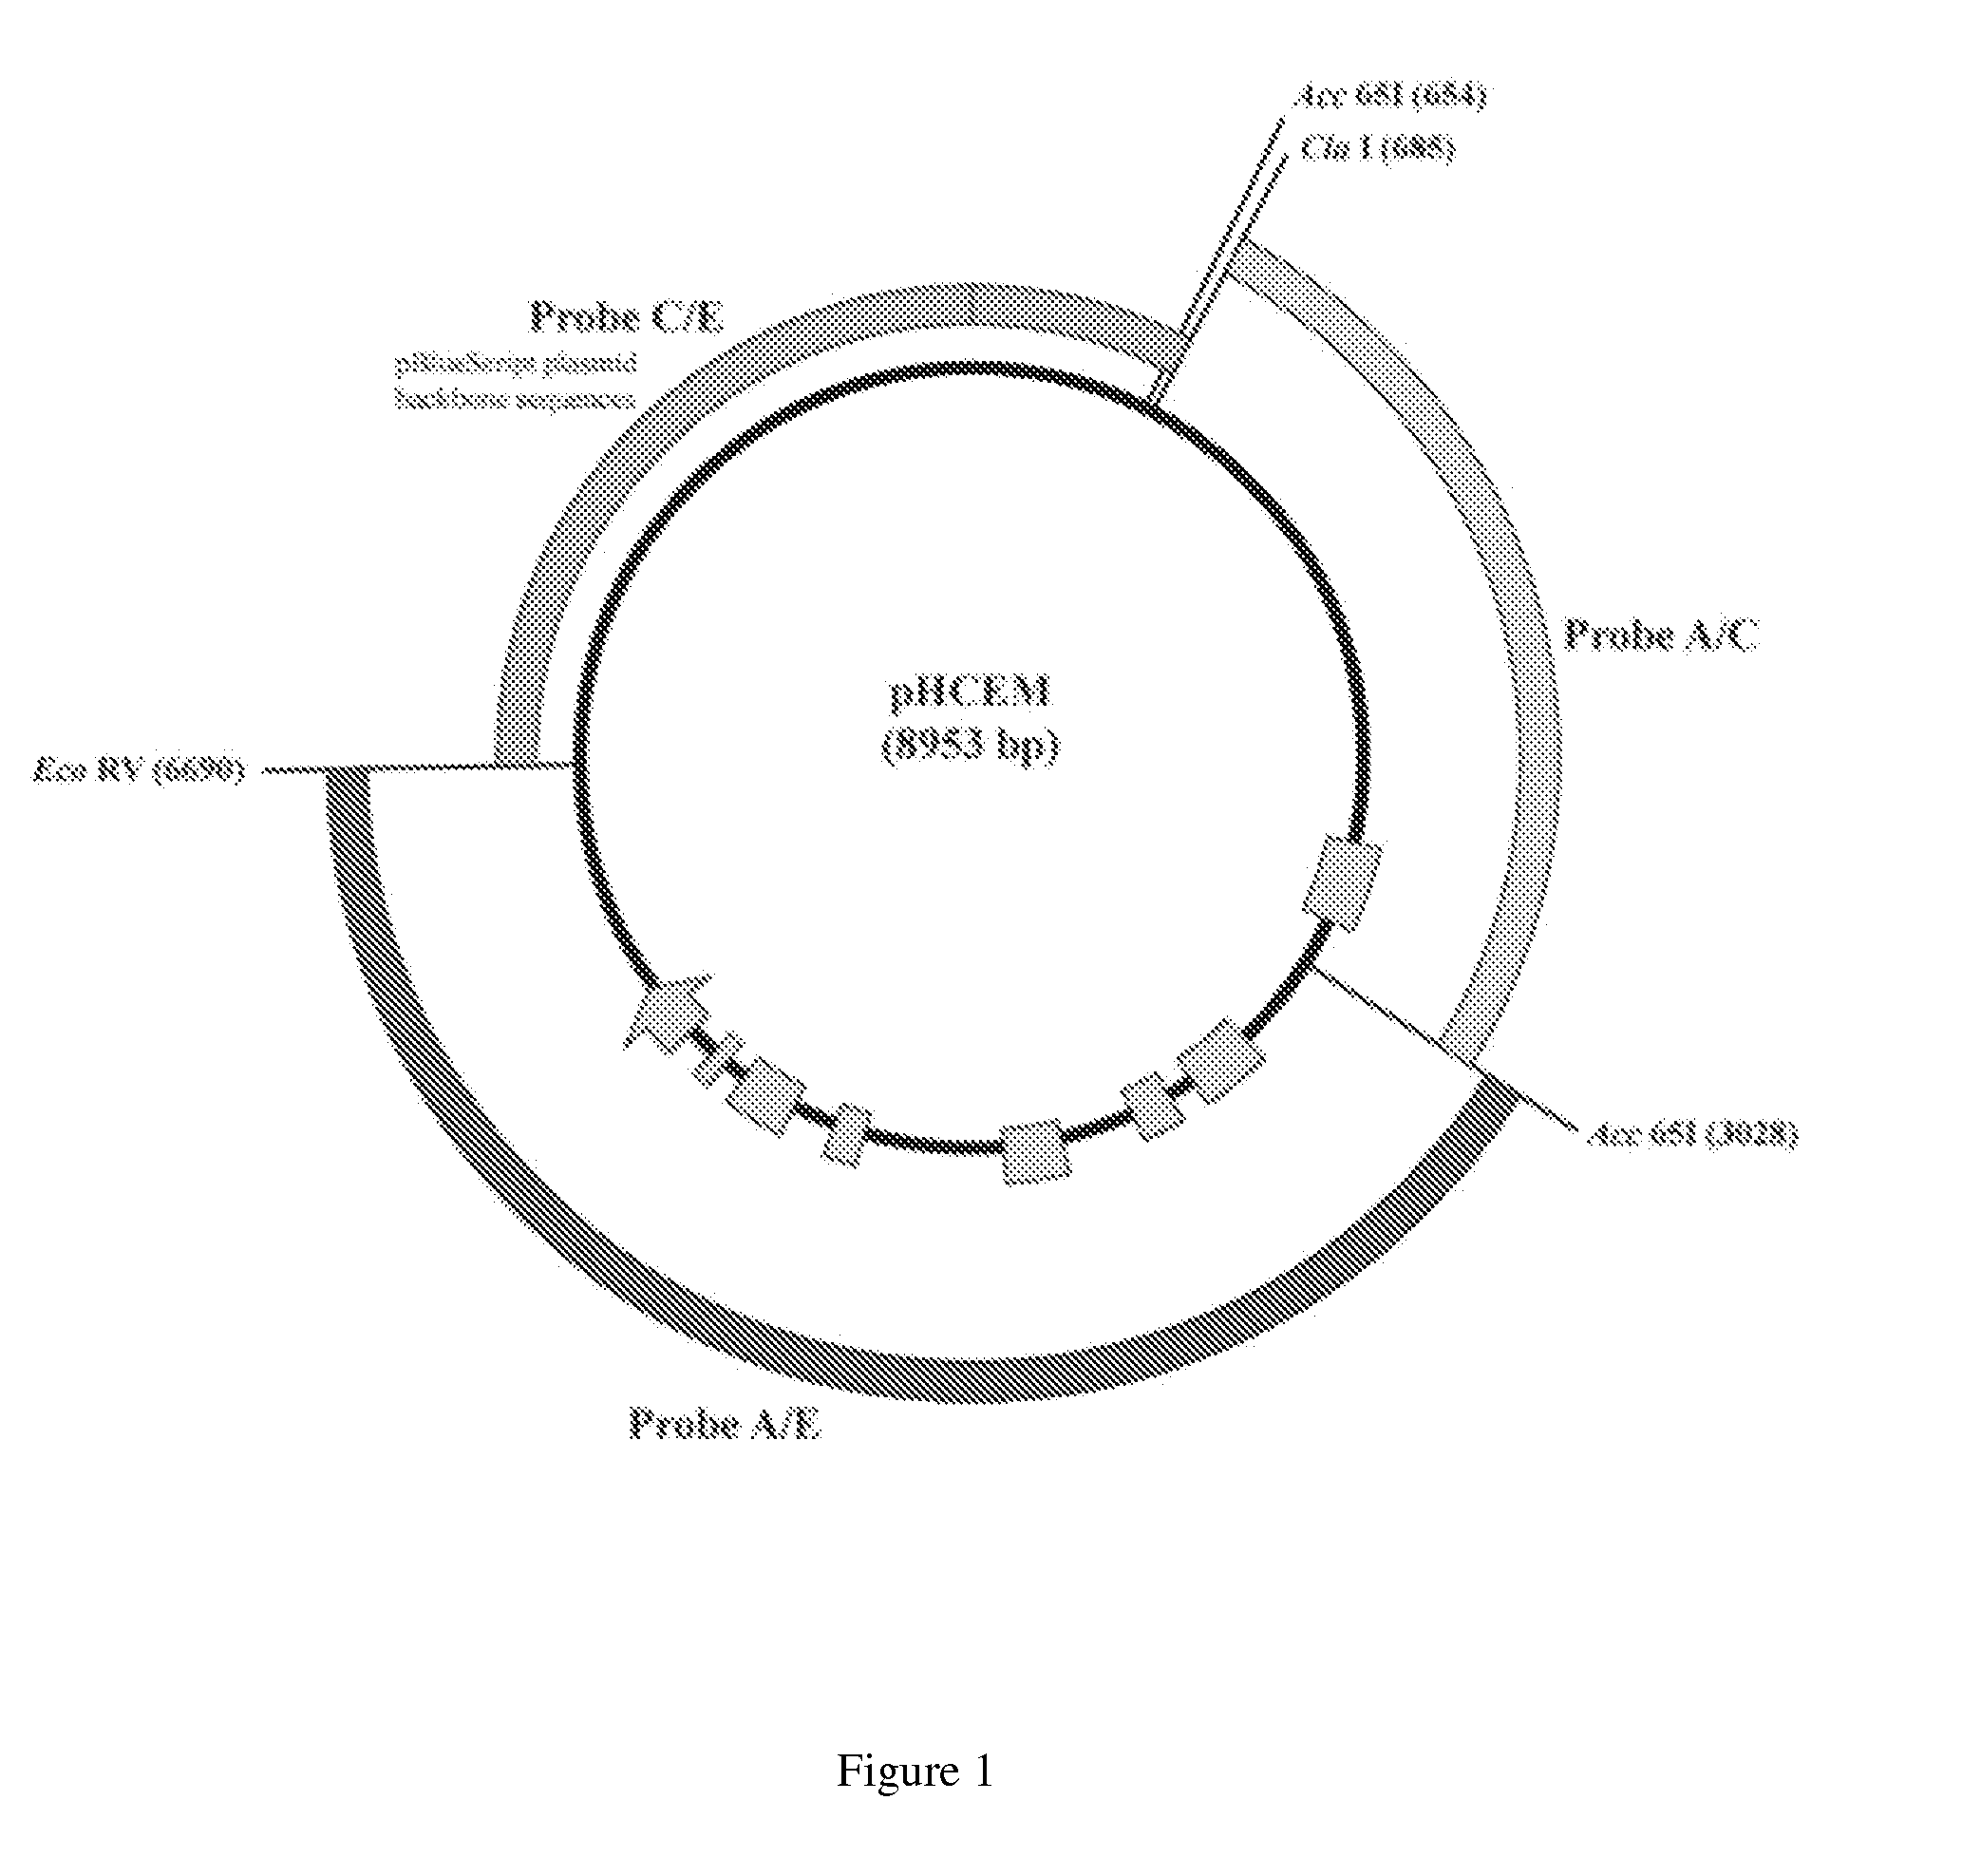 Maize event HCEM485, compositions and methods for detecting and use thereof